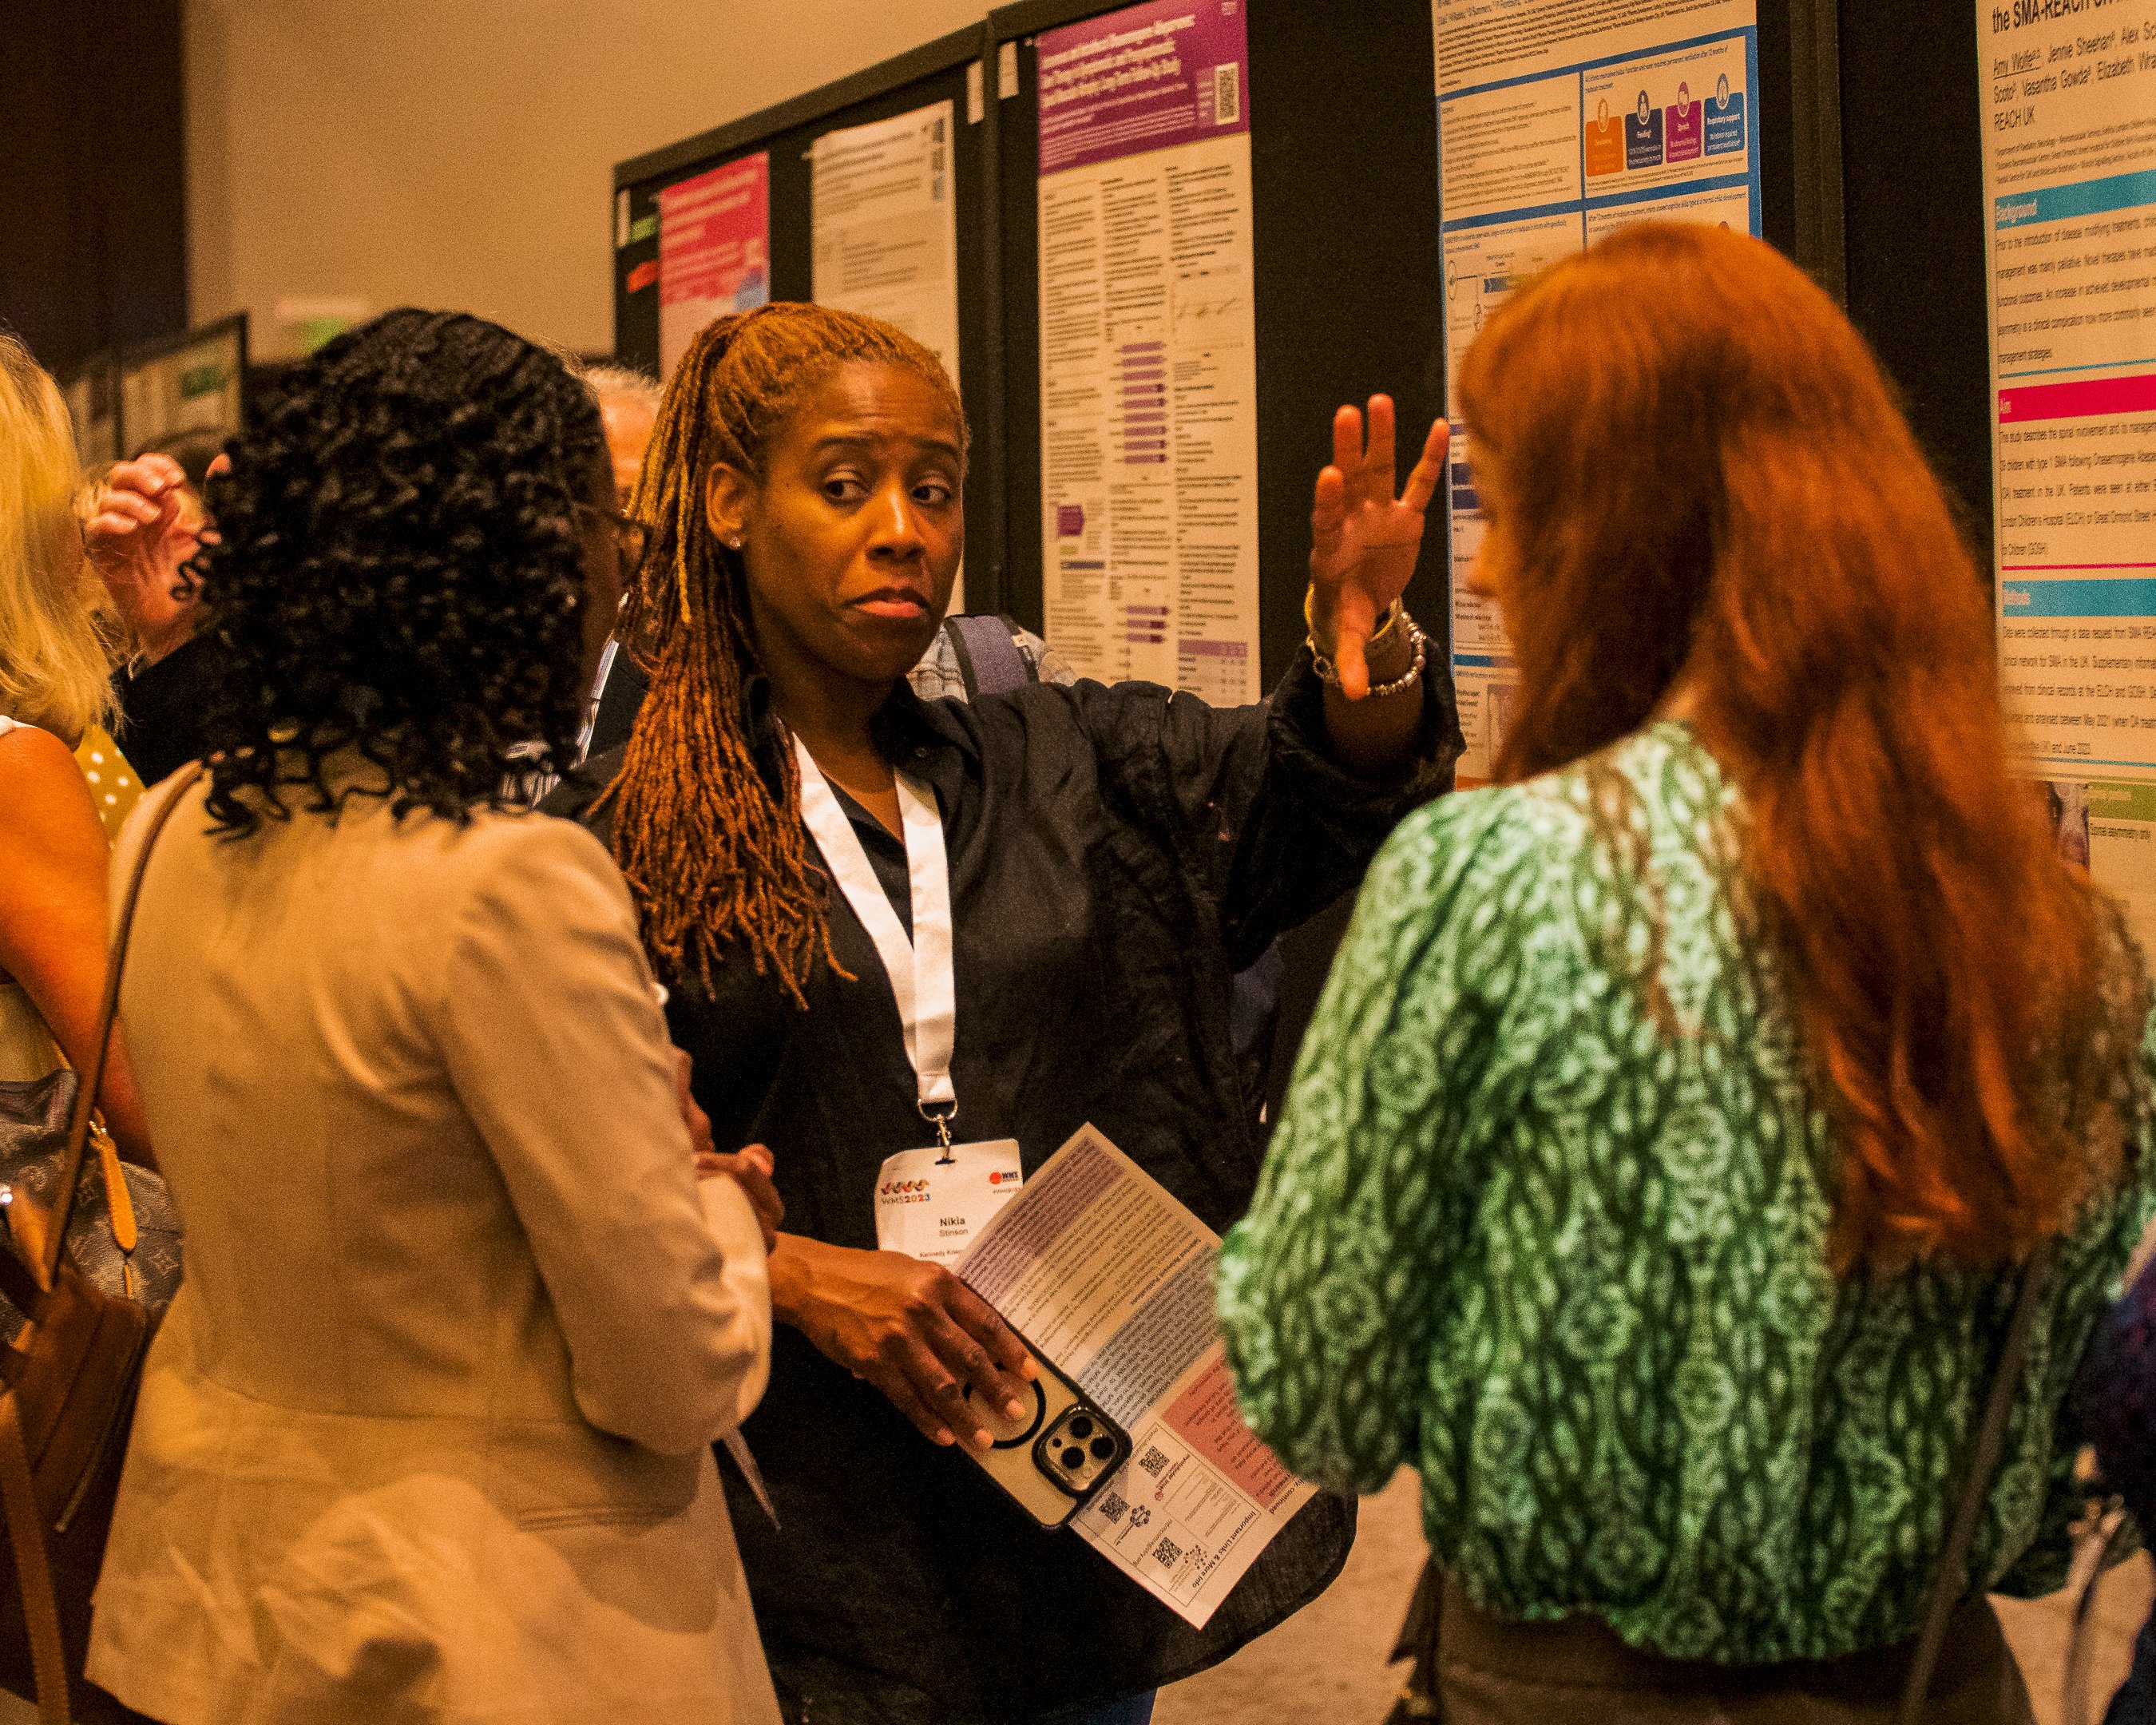 Image shows three people gathered at a poster presentation